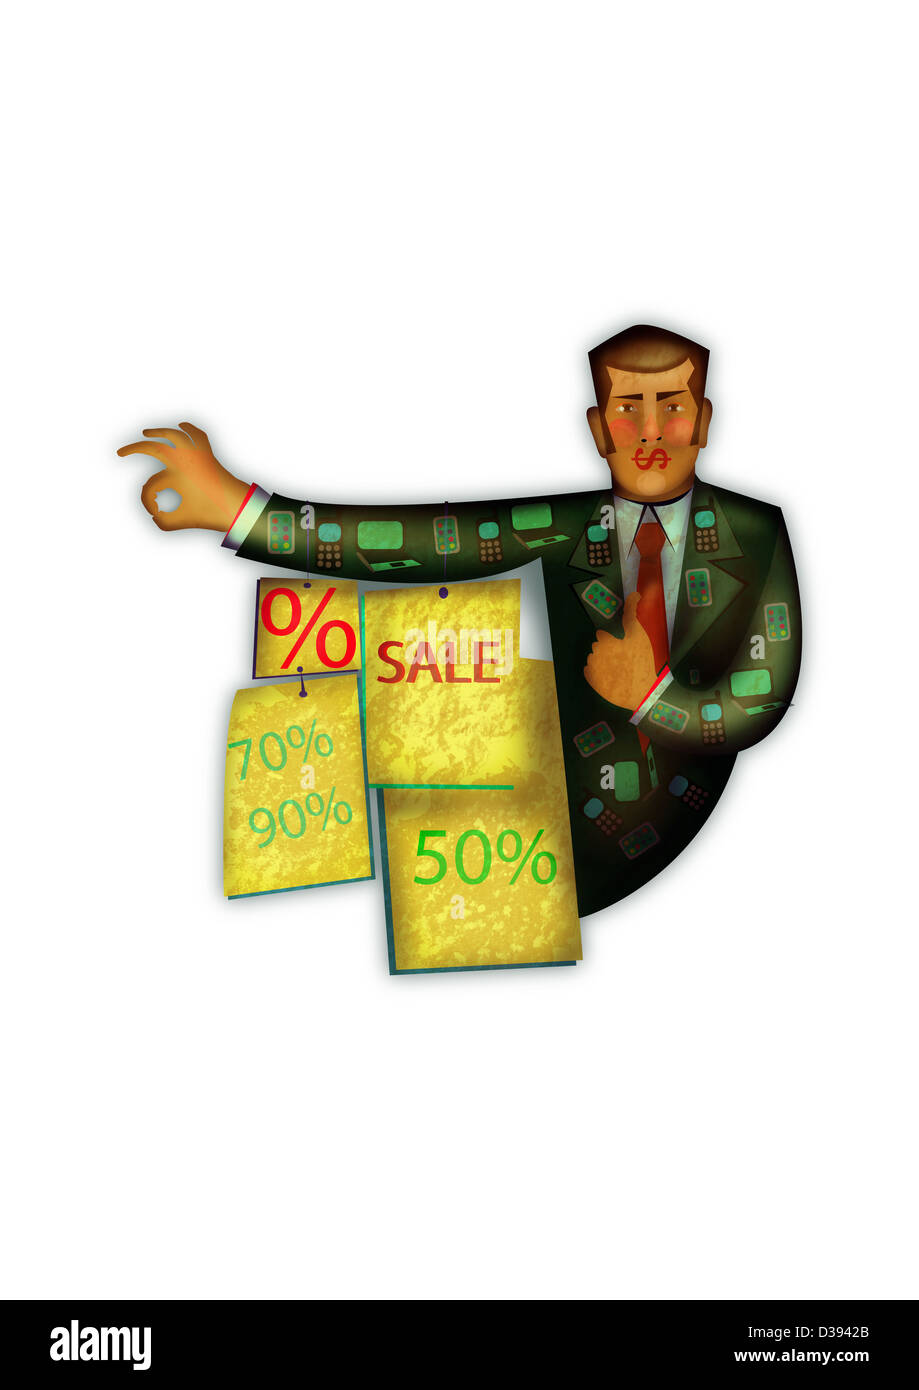 Illustration of salesman with discount and sale boards over white background Stock Photo